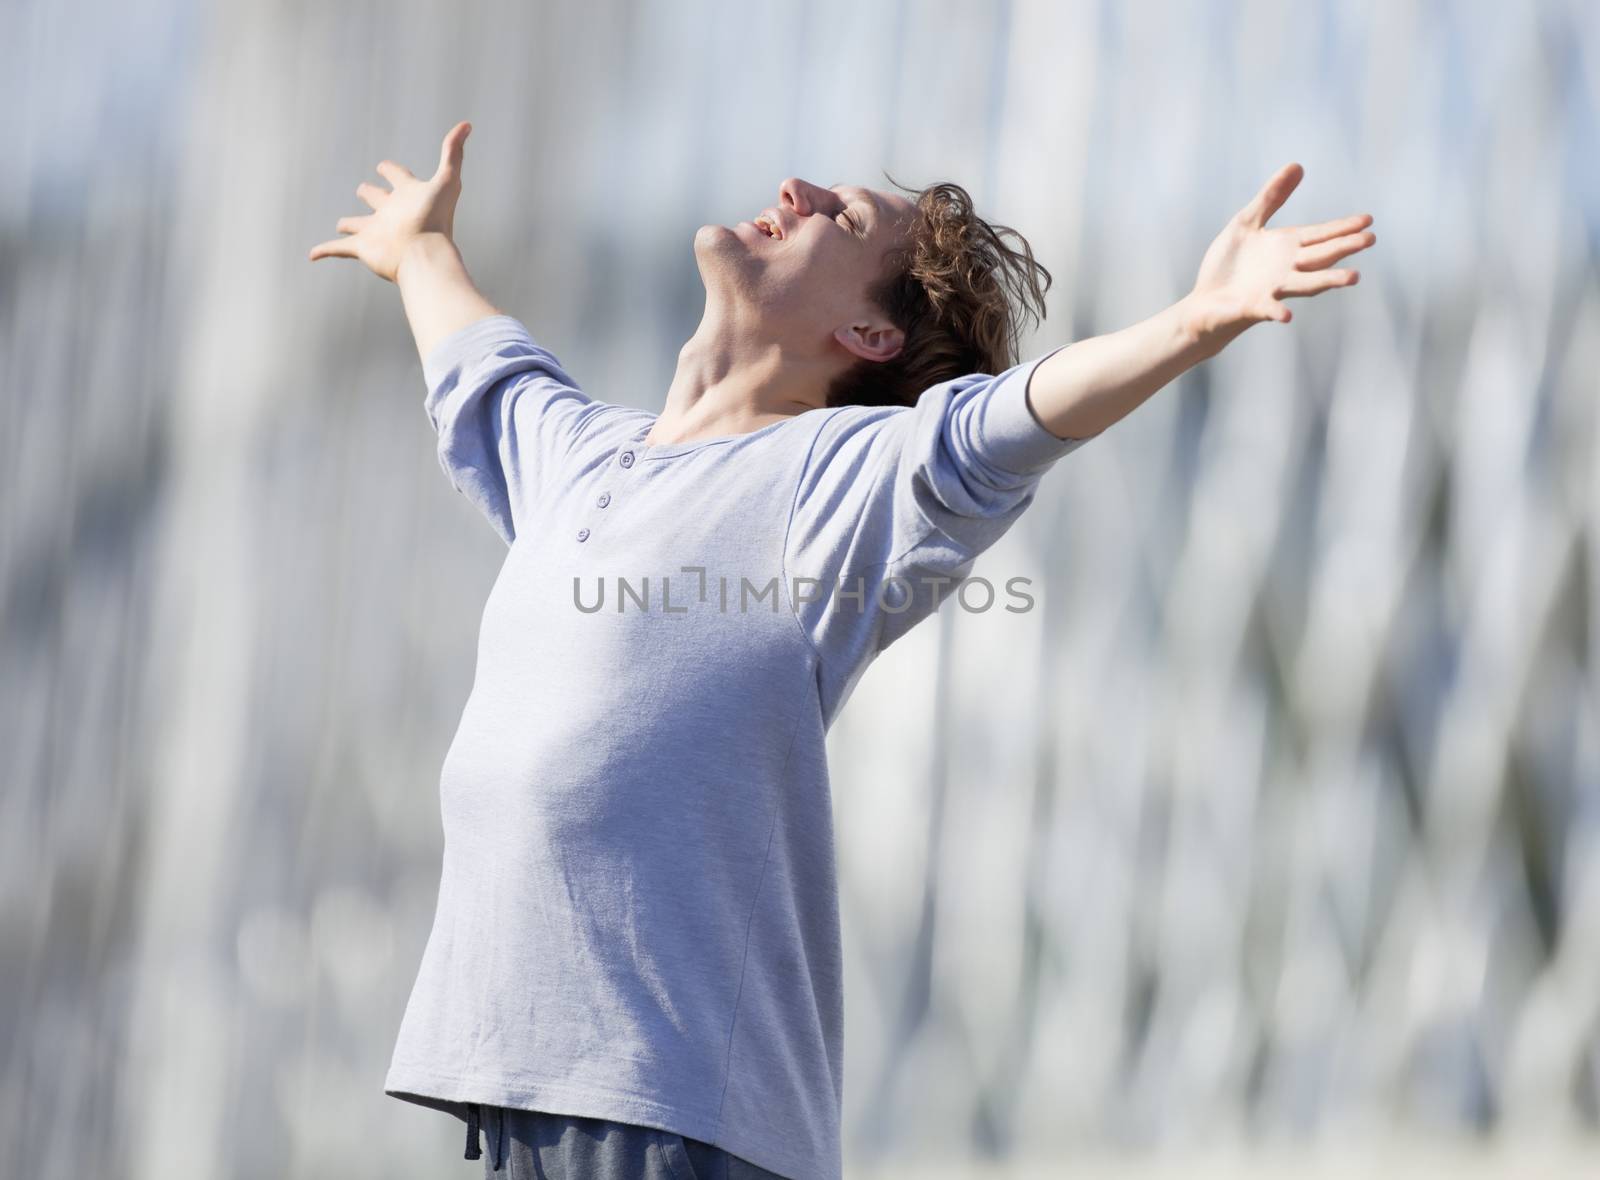 Excited Young Man Stretching out his Arm in Emotion by courtyardpix